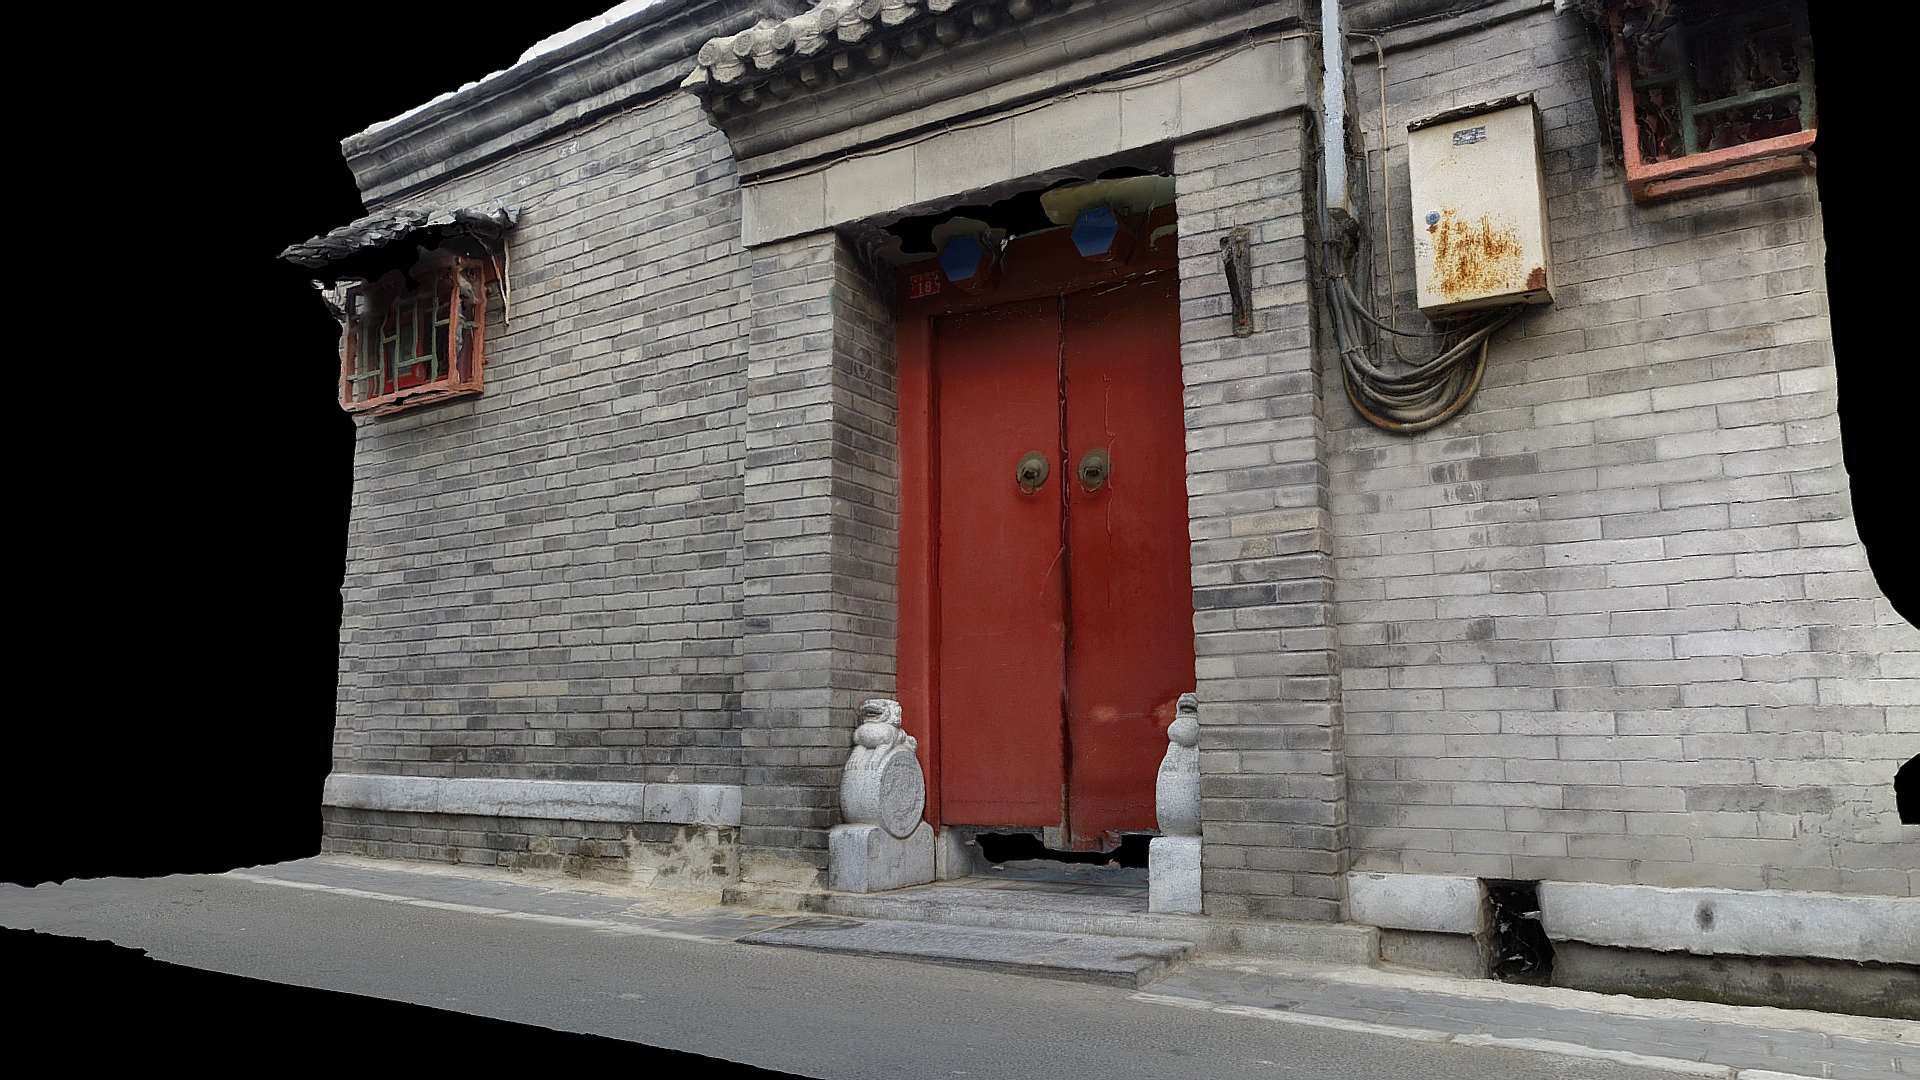 3D model 2016-10 – Beijing 26 - This is a 3D model of the 2016-10 - Beijing 26. The 3D model is about a red door on a stone building.